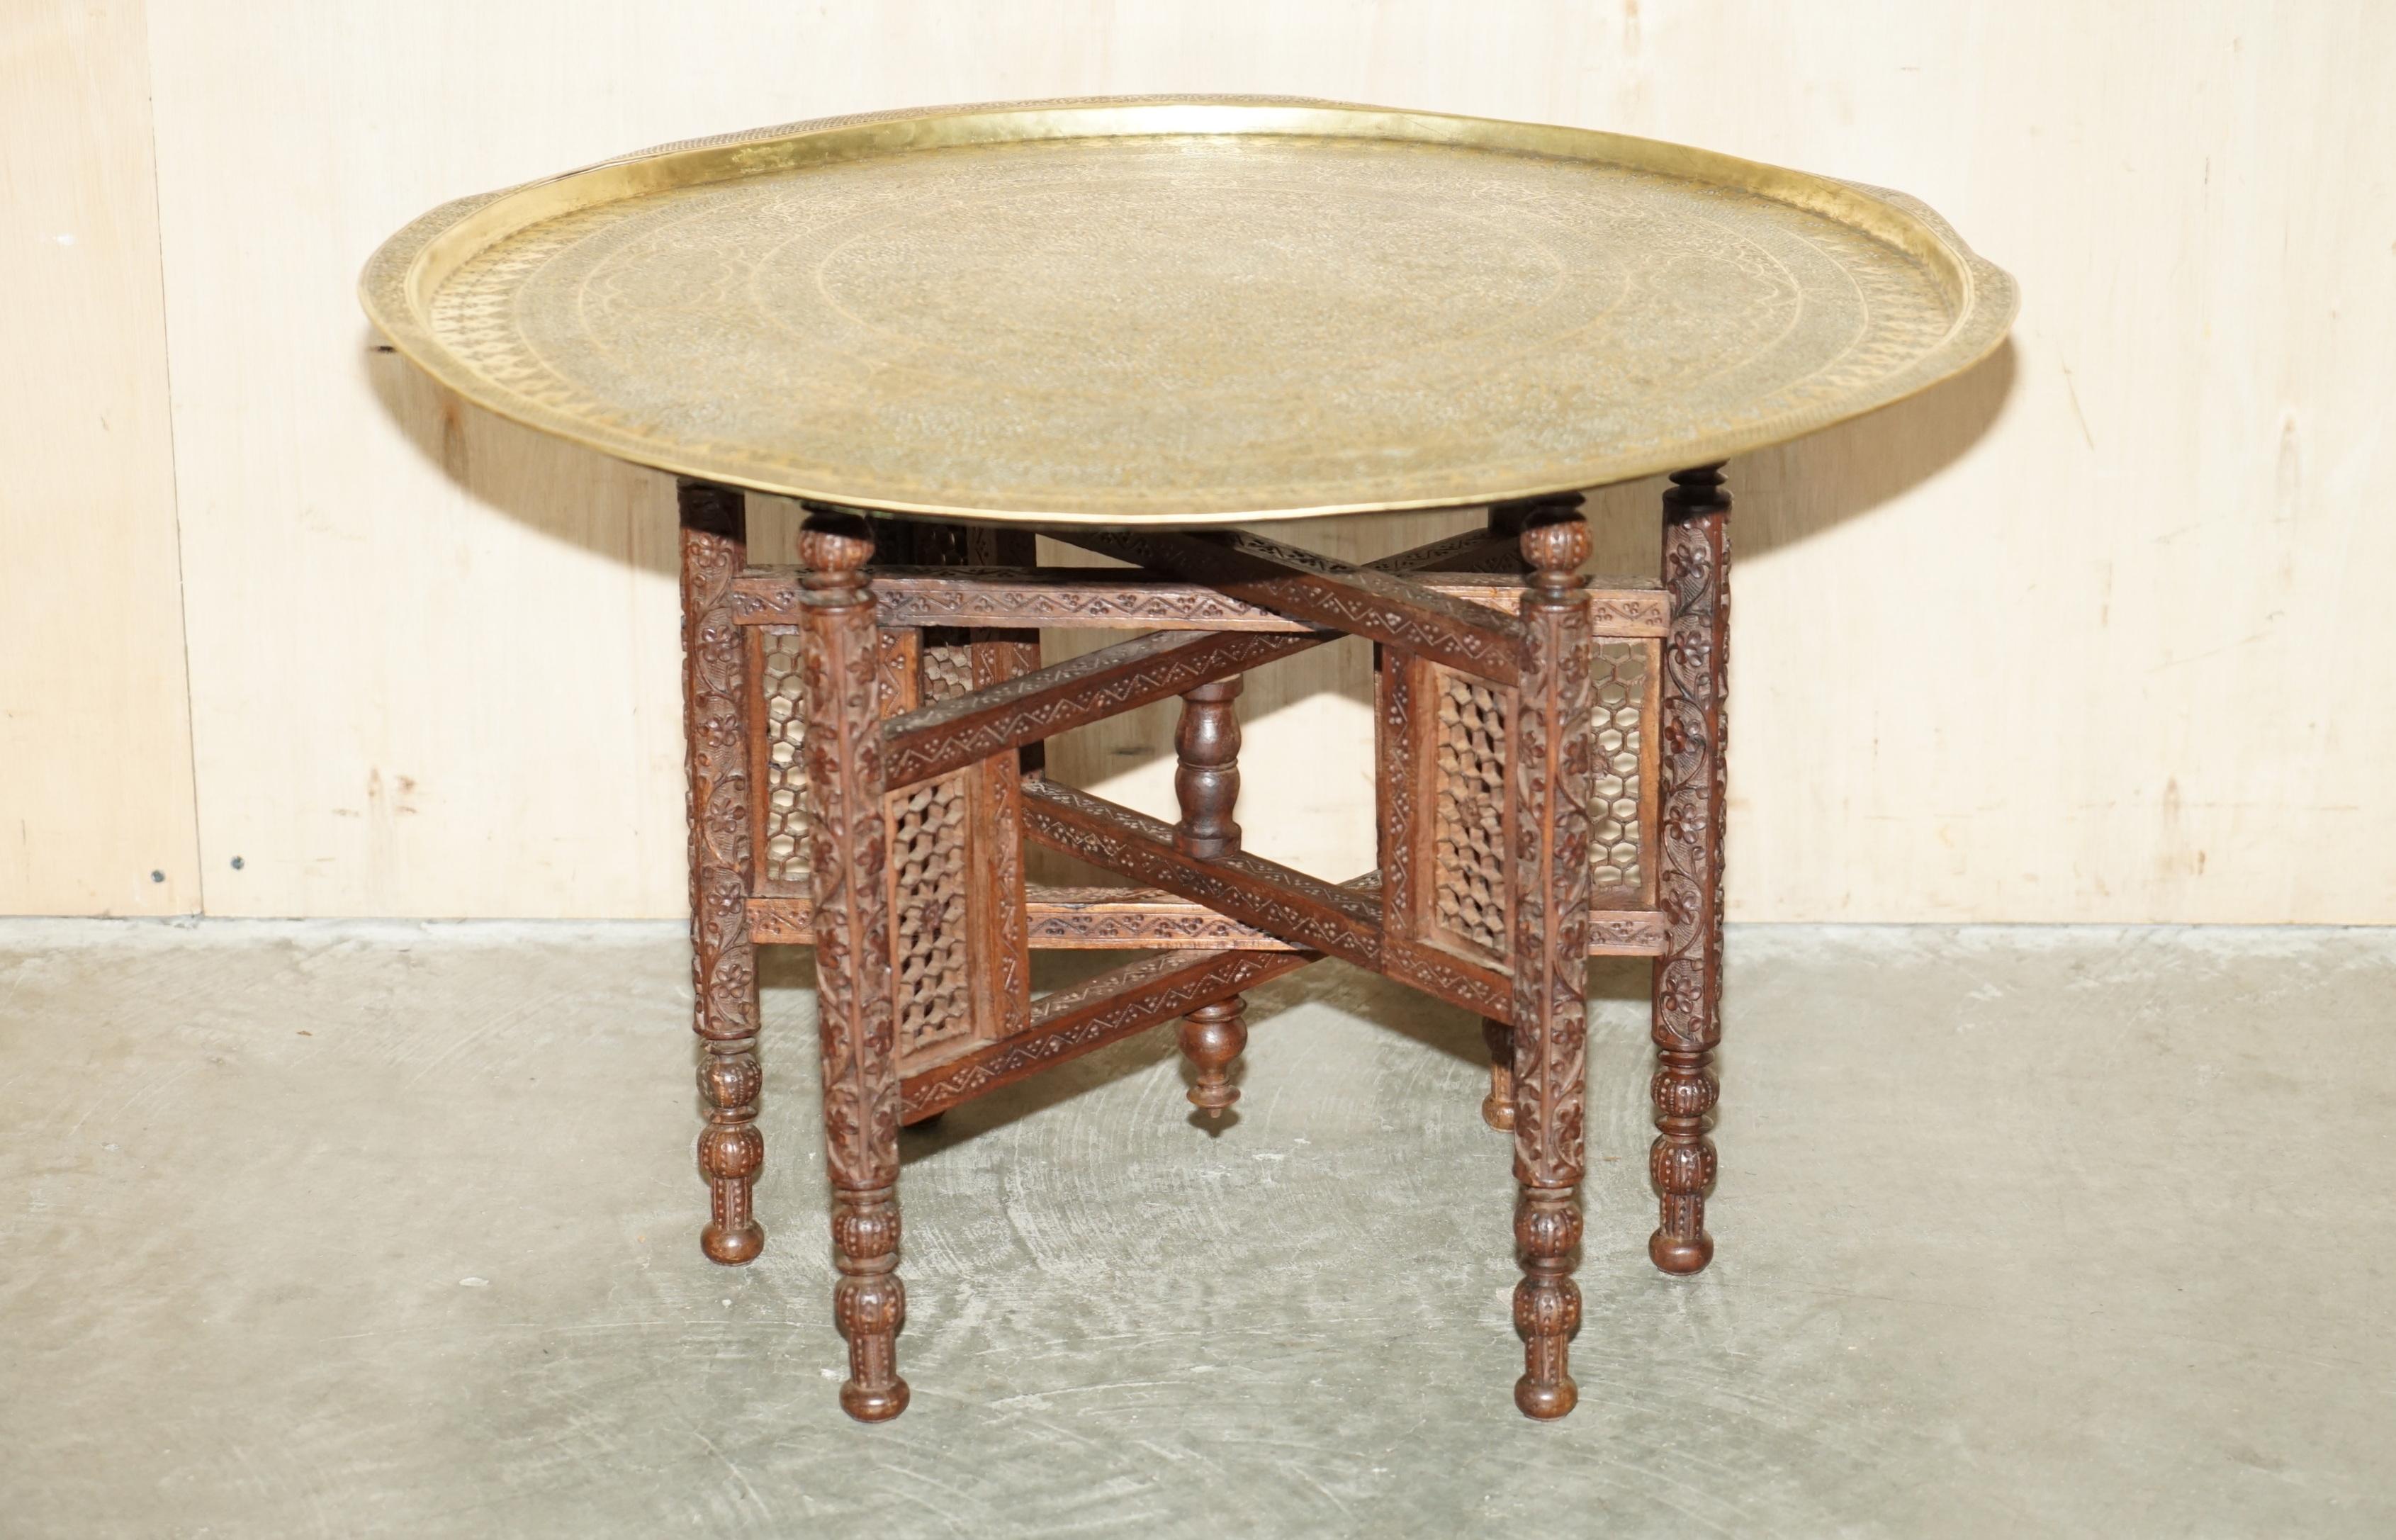 Royal House Antiques

Royal House Antiques is delighted to offer for sale this larger than normal, ornately hand carved Moroccan brass tray table retailed through Liberty's in the 1880-1900's

Please note the delivery fee listed is just a guide, it